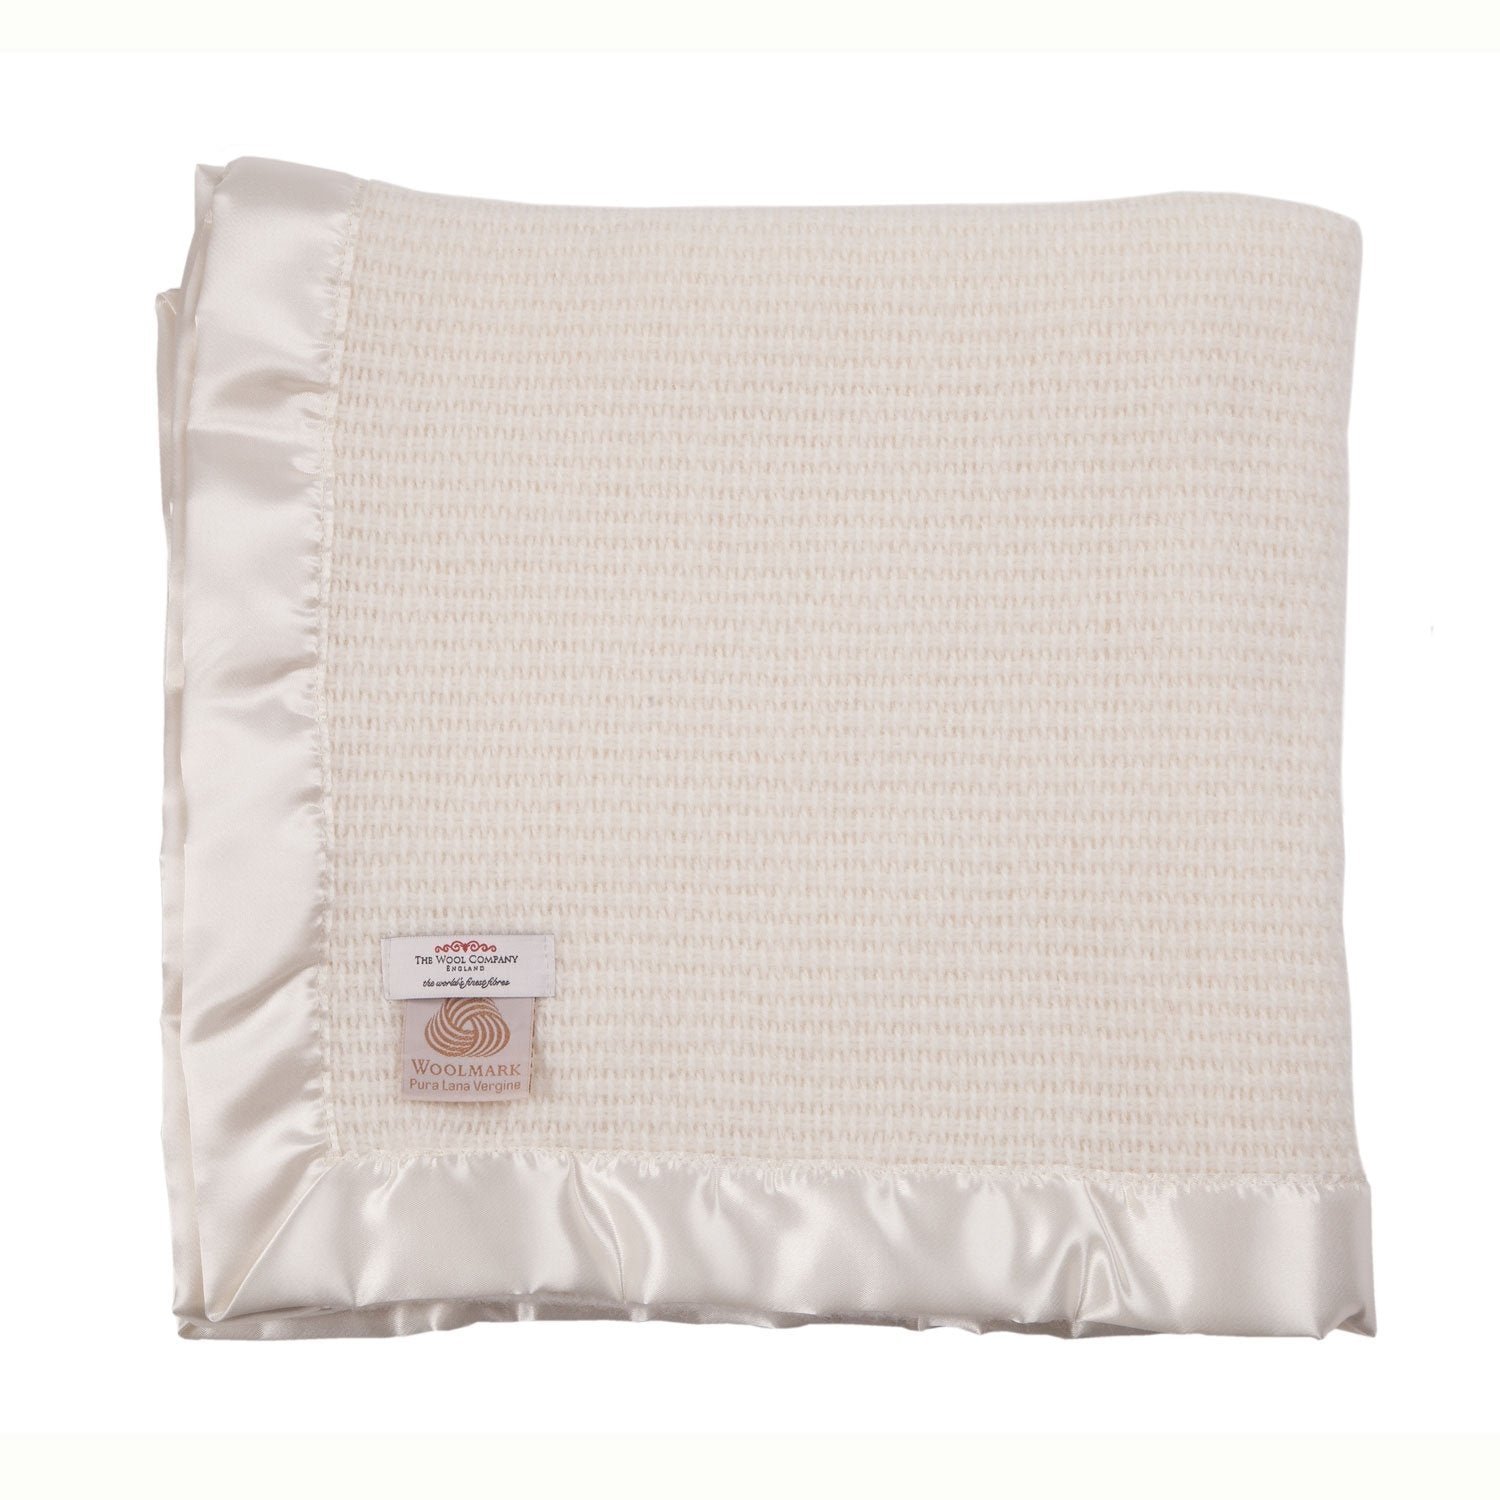 Wool Cellular Baby Blanket | Satin Trim | The Wool Company